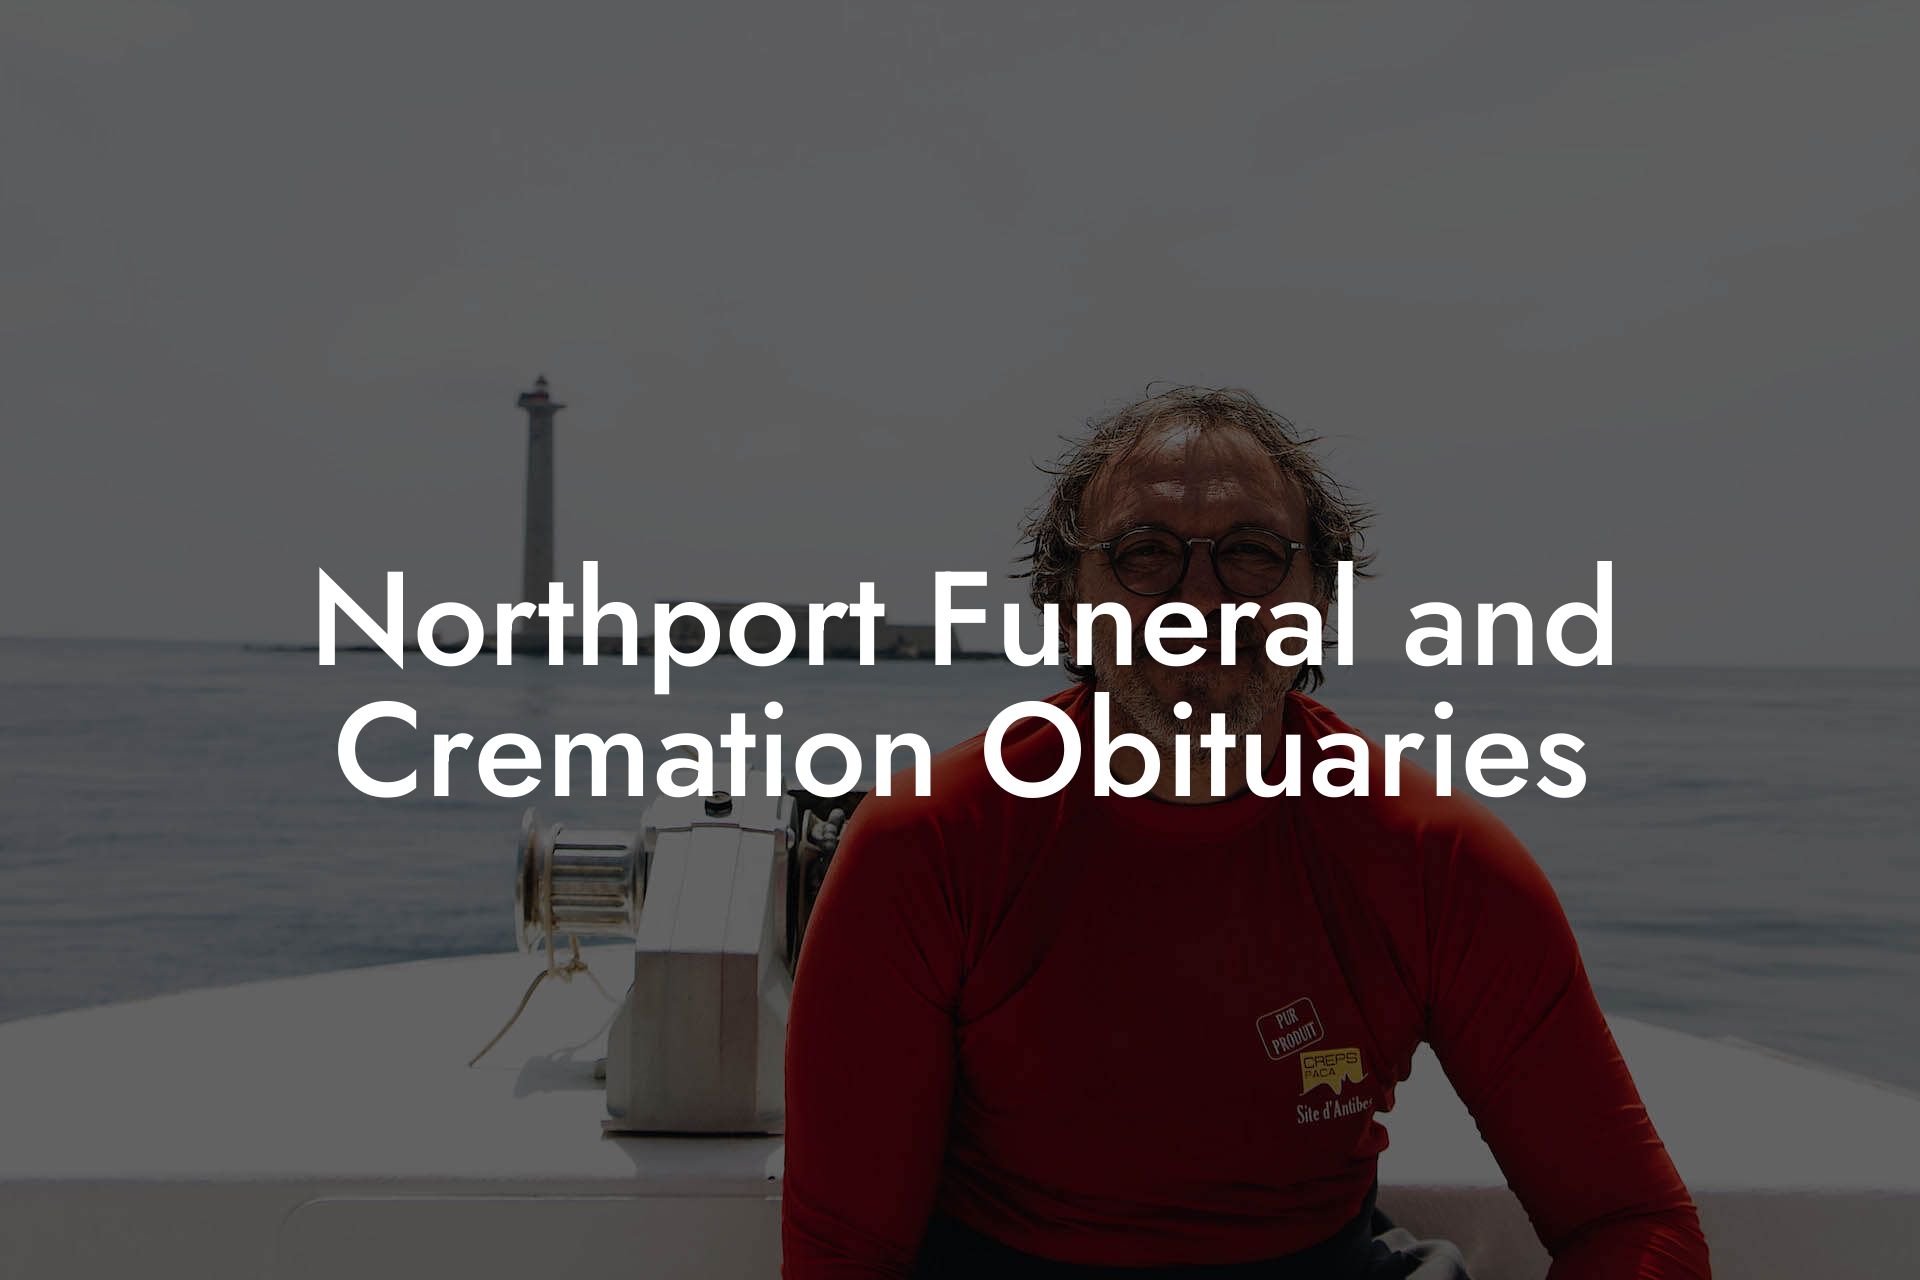 Northport Funeral and Cremation Obituaries